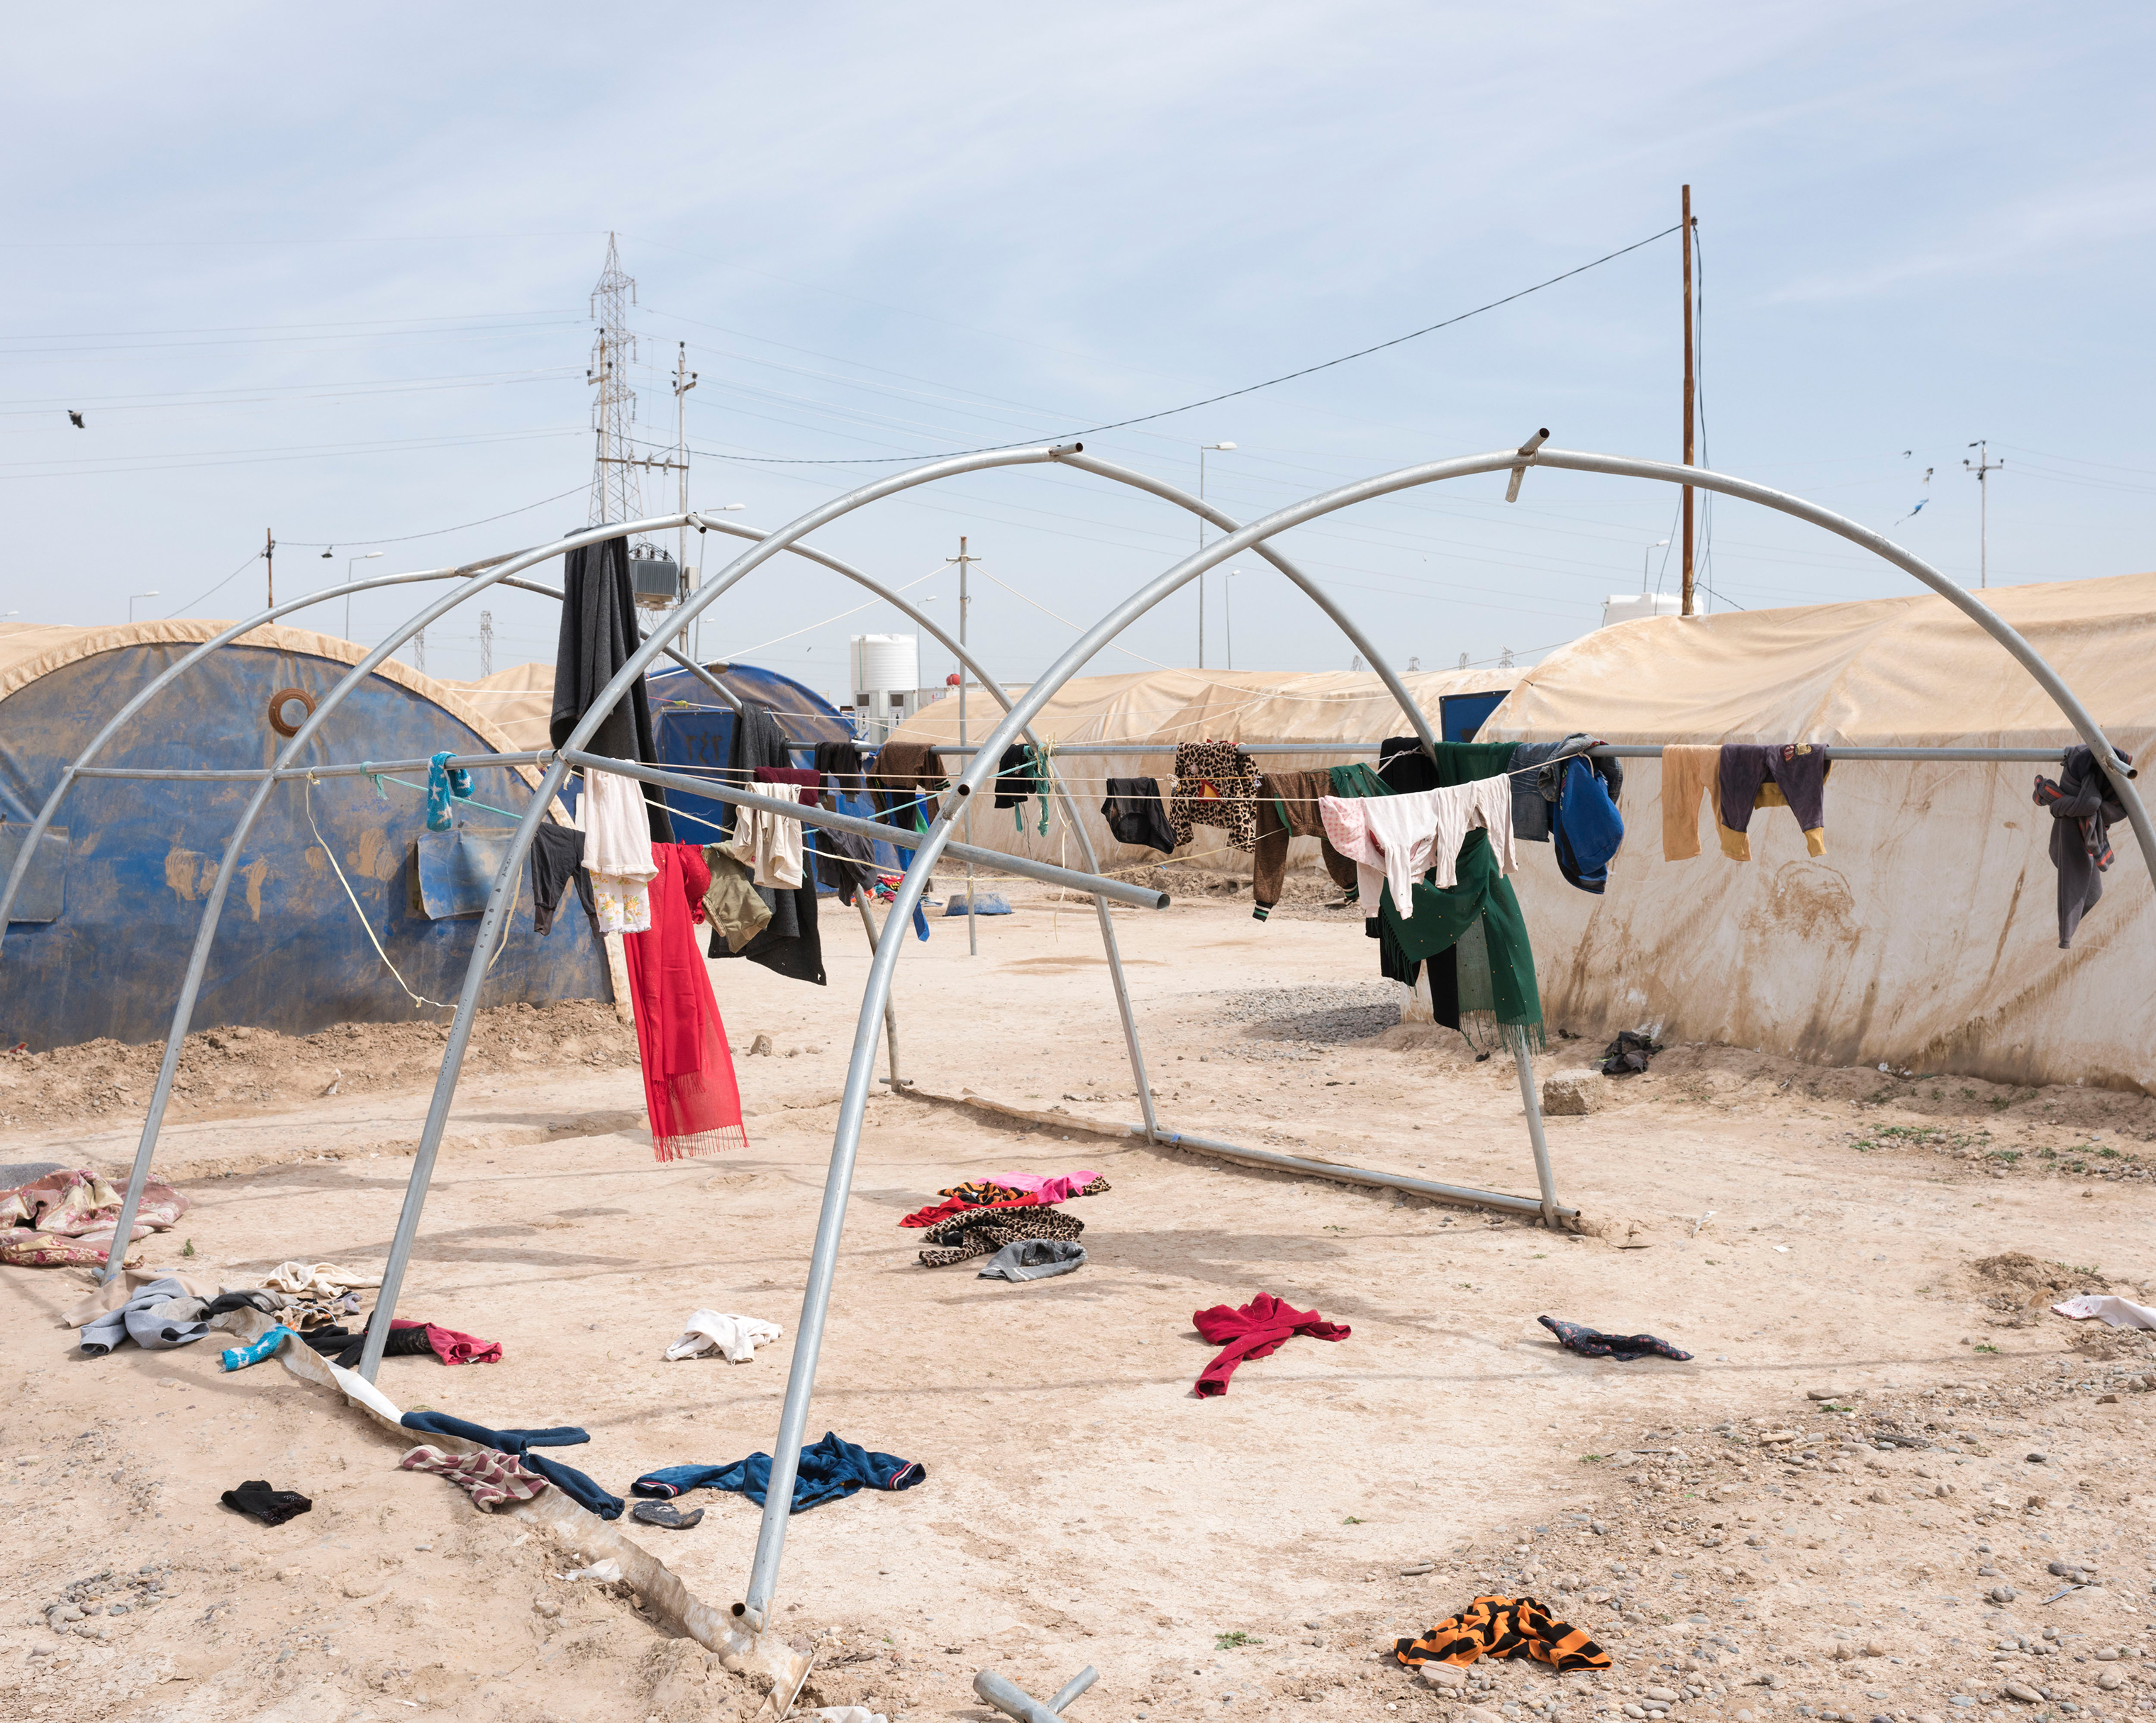 A refugee camp where relatives of ISIS fighters are detained in Iraq in April. (Lorenzo Meloni—Magnum Photos)